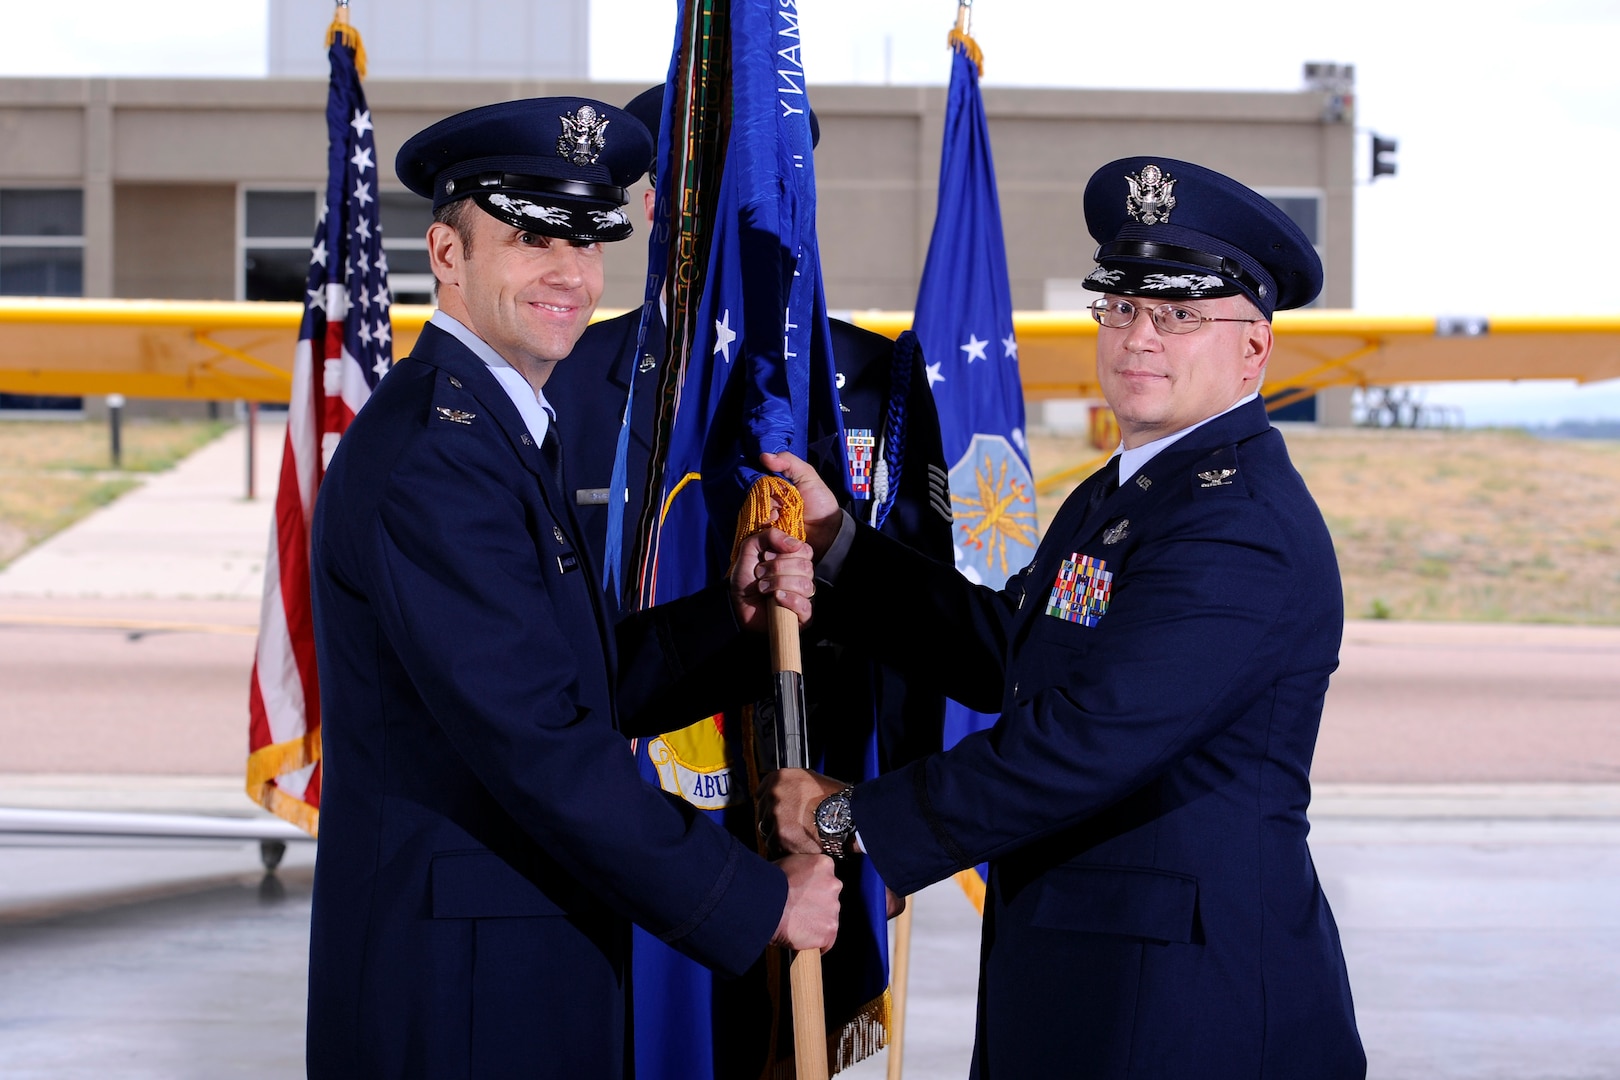 Col. Joseph Rizzuto, right, accepts the guidon and command of  the 306th Flying Training Group from Col. Gerald Goodfellow, 12th Flying Training Wing commander, during a change of command ceremony July 9. Rizzuto replaces Col. Christopher Plamp, who is headed to the NATO Combined Air Operations Center in Uedem, Germany, where he will be the Director of Operations and Commander of the U.S. Element there. (U.S. Air Force Photo/Mike Kaplan)